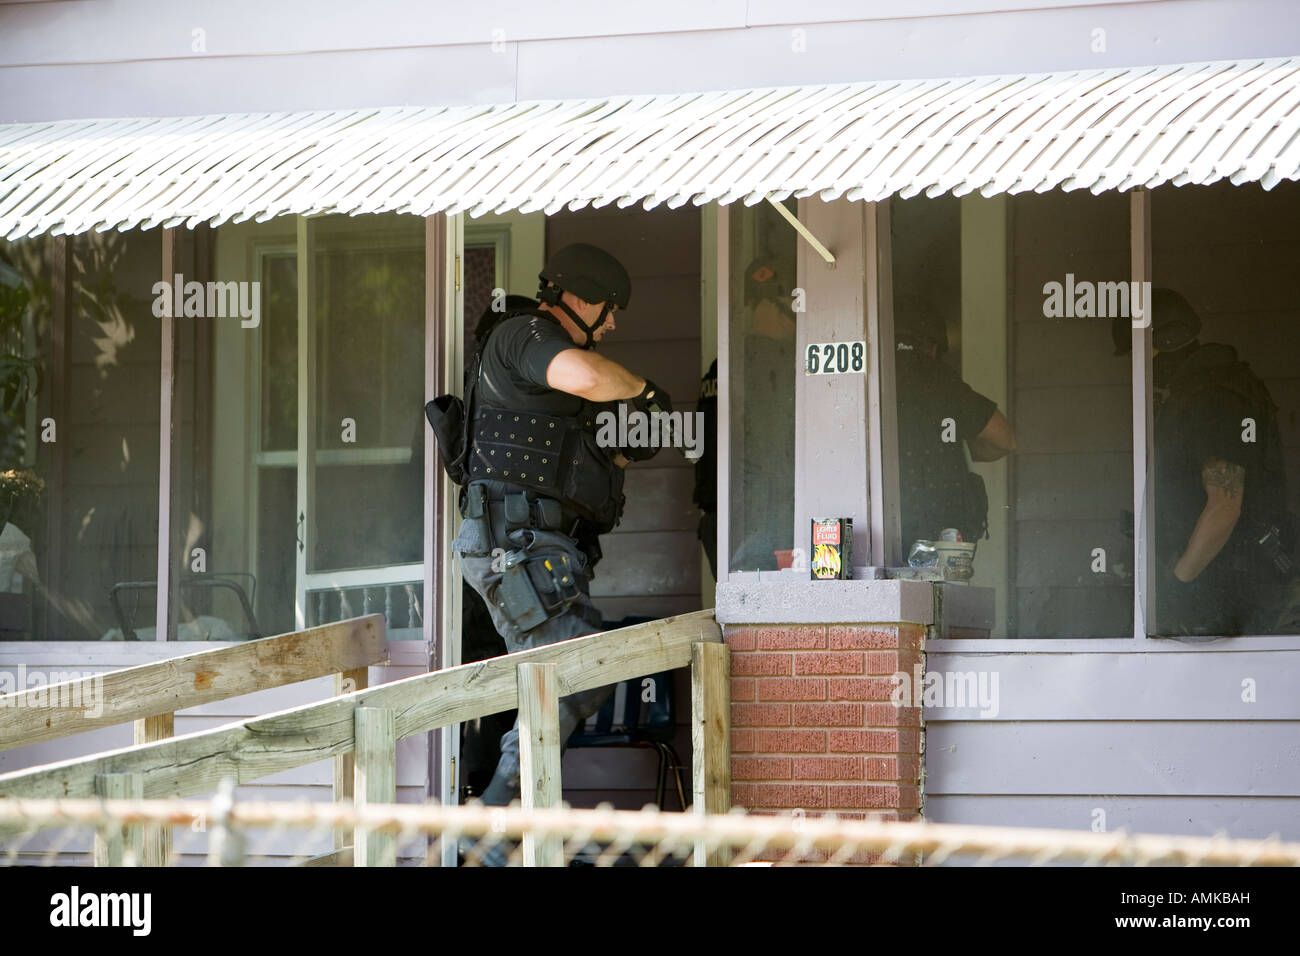 Police officers from tactical narcotics unit carrying out high risk search warrant in suspected drug house. Kansas City SWAT. Stock Photo